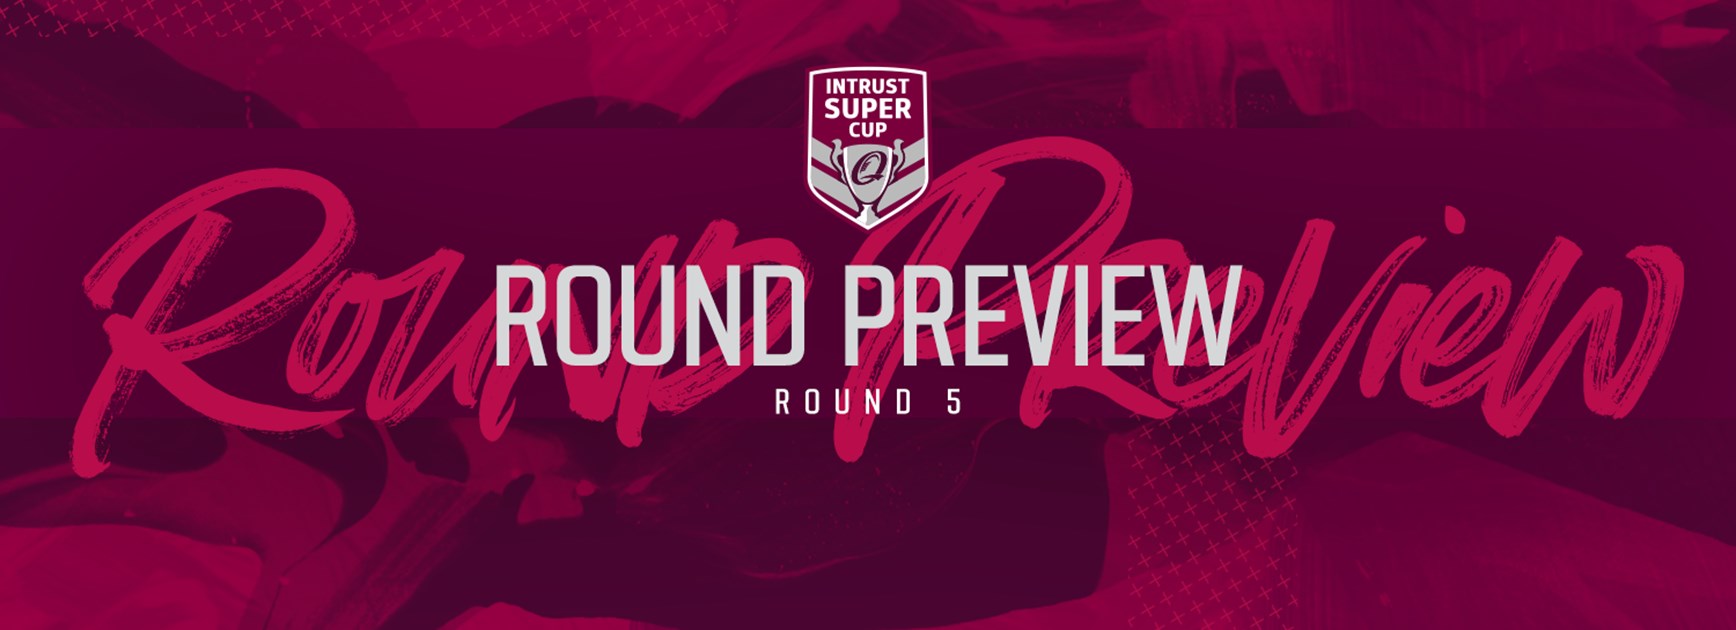 Intrust Super Cup Round 5 - Red Socks Round preview